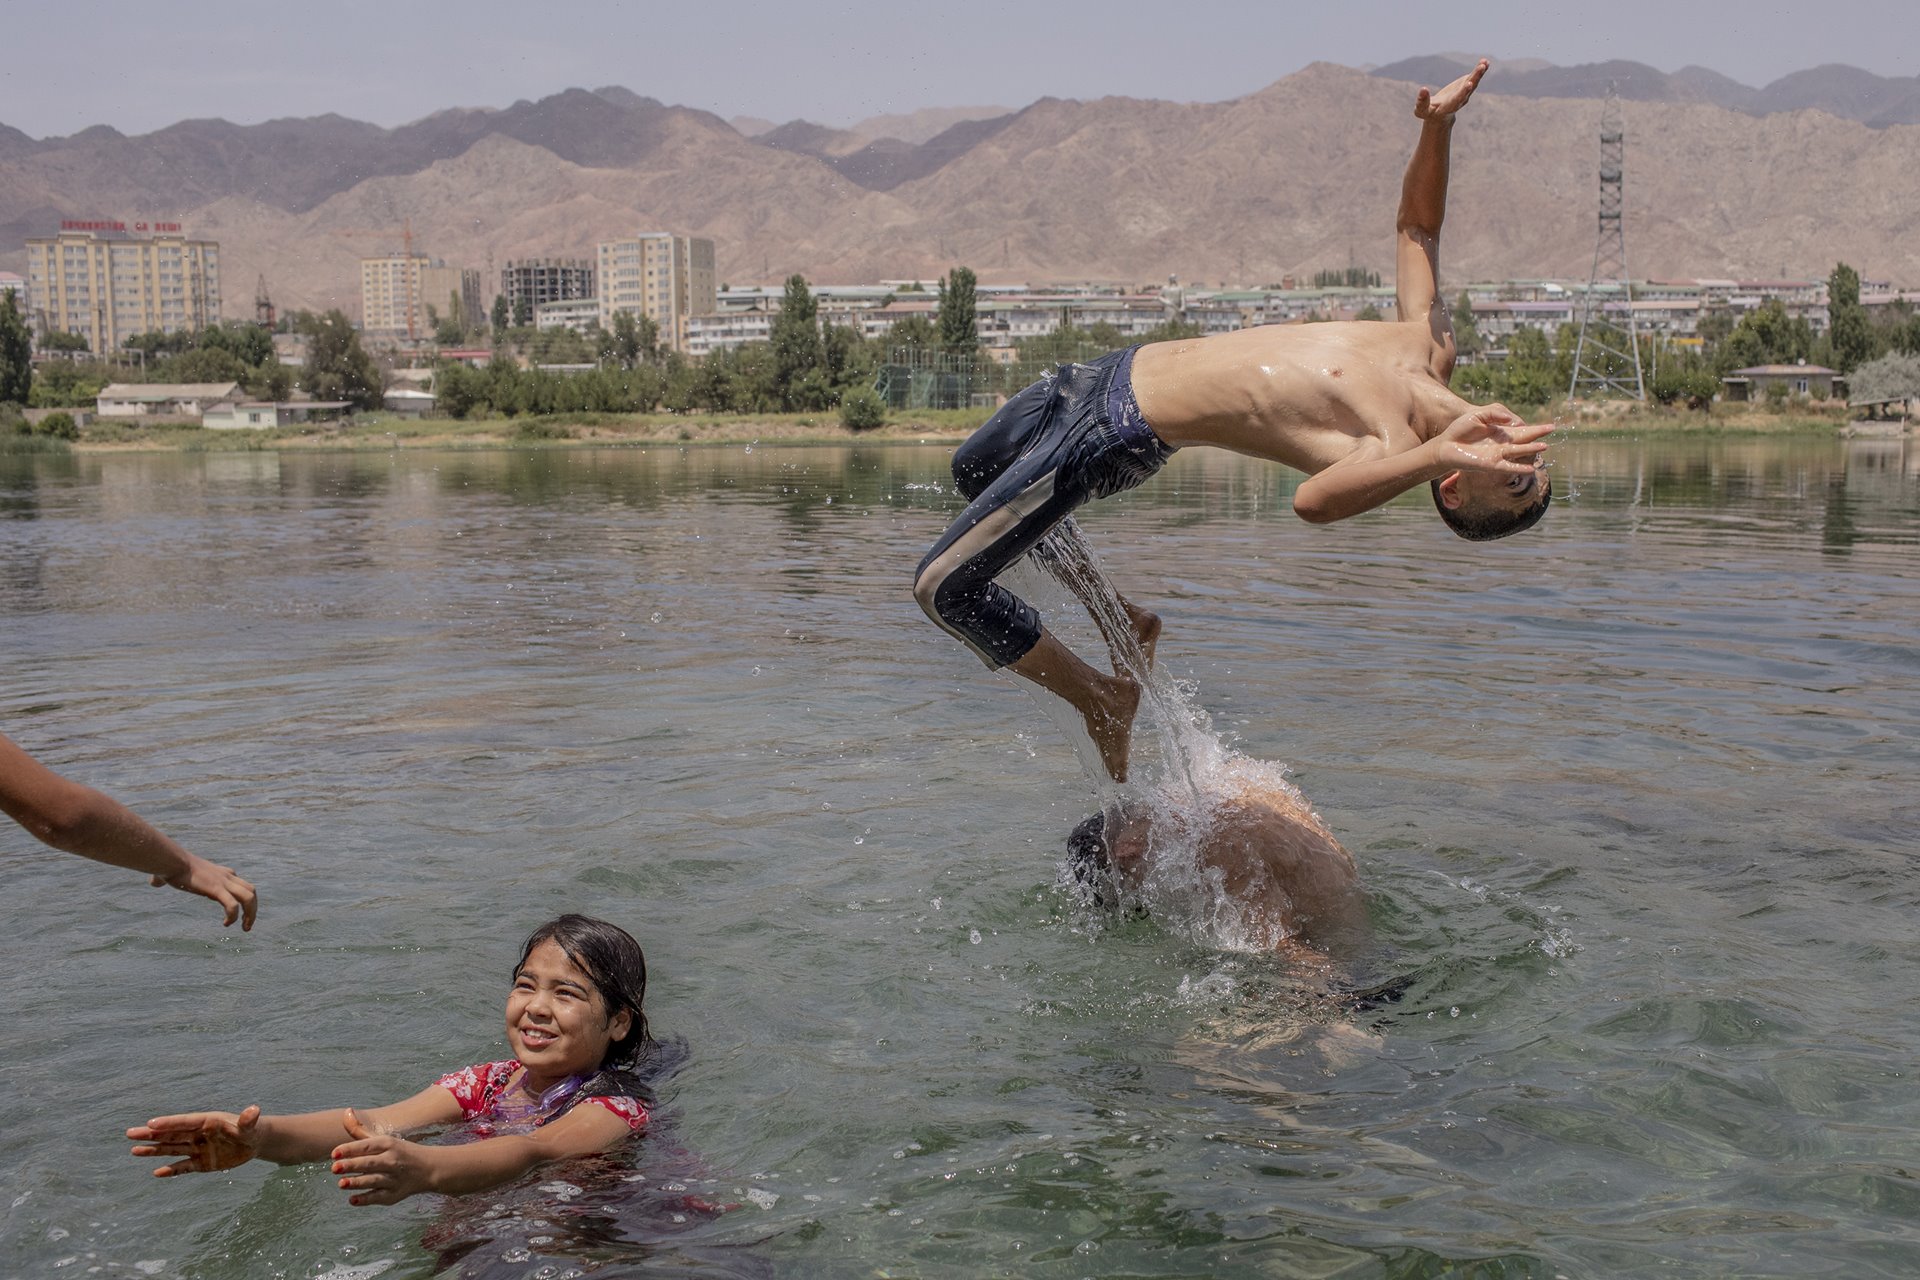 Young people swim in the Syr Darya River, where it flows through Khujand, Tajikistan&rsquo;s second-largest city.